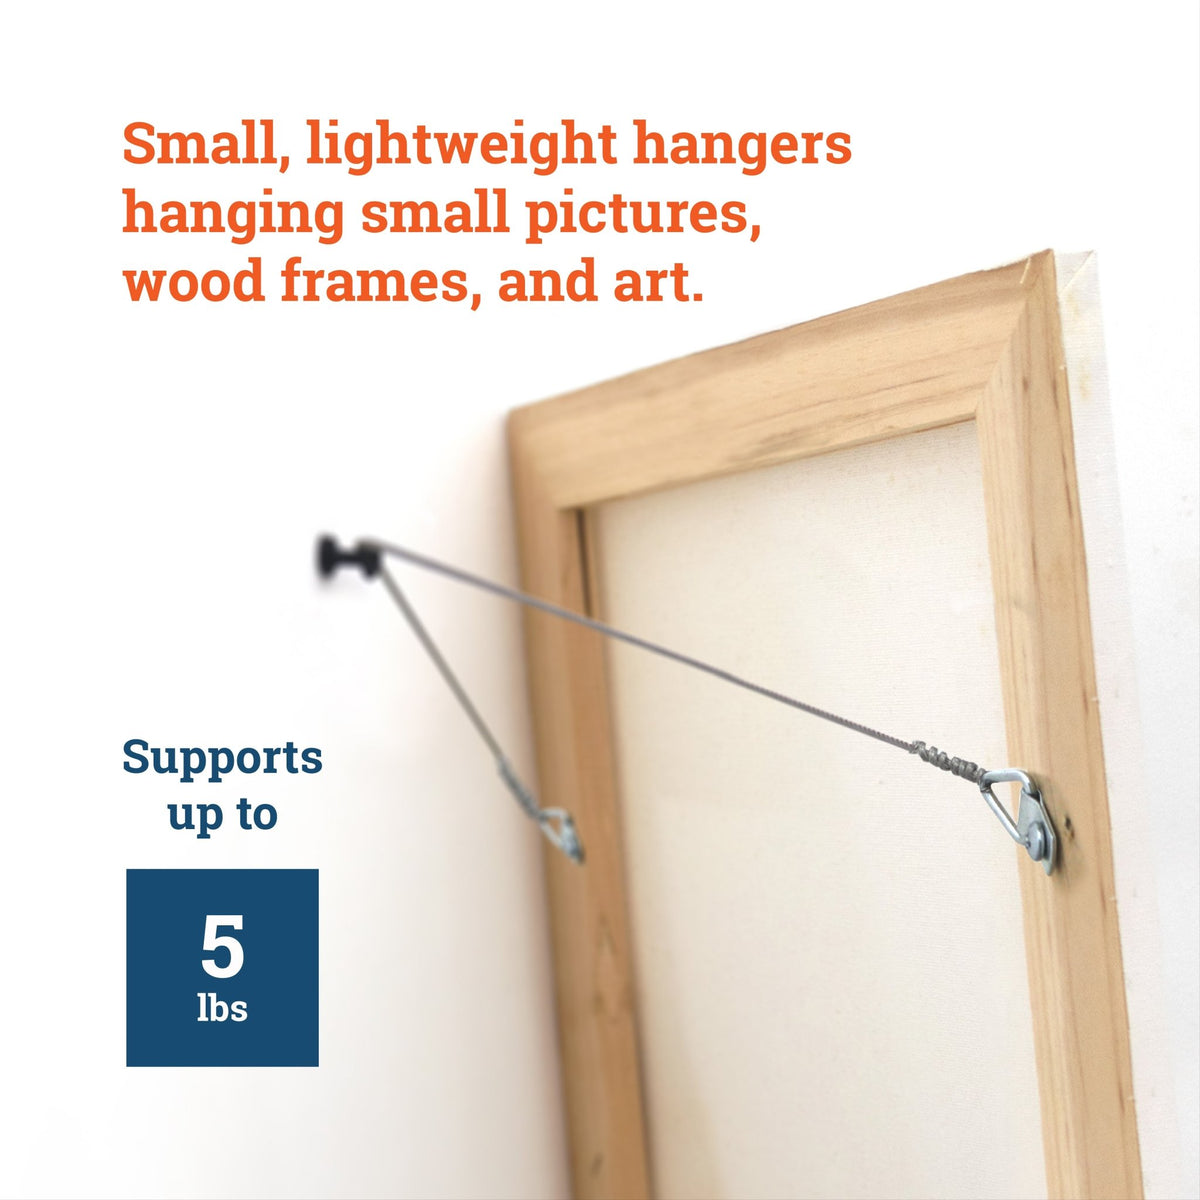 Mini 1-Hole Hanger - HWR-5589X - Picture Hang Solutions